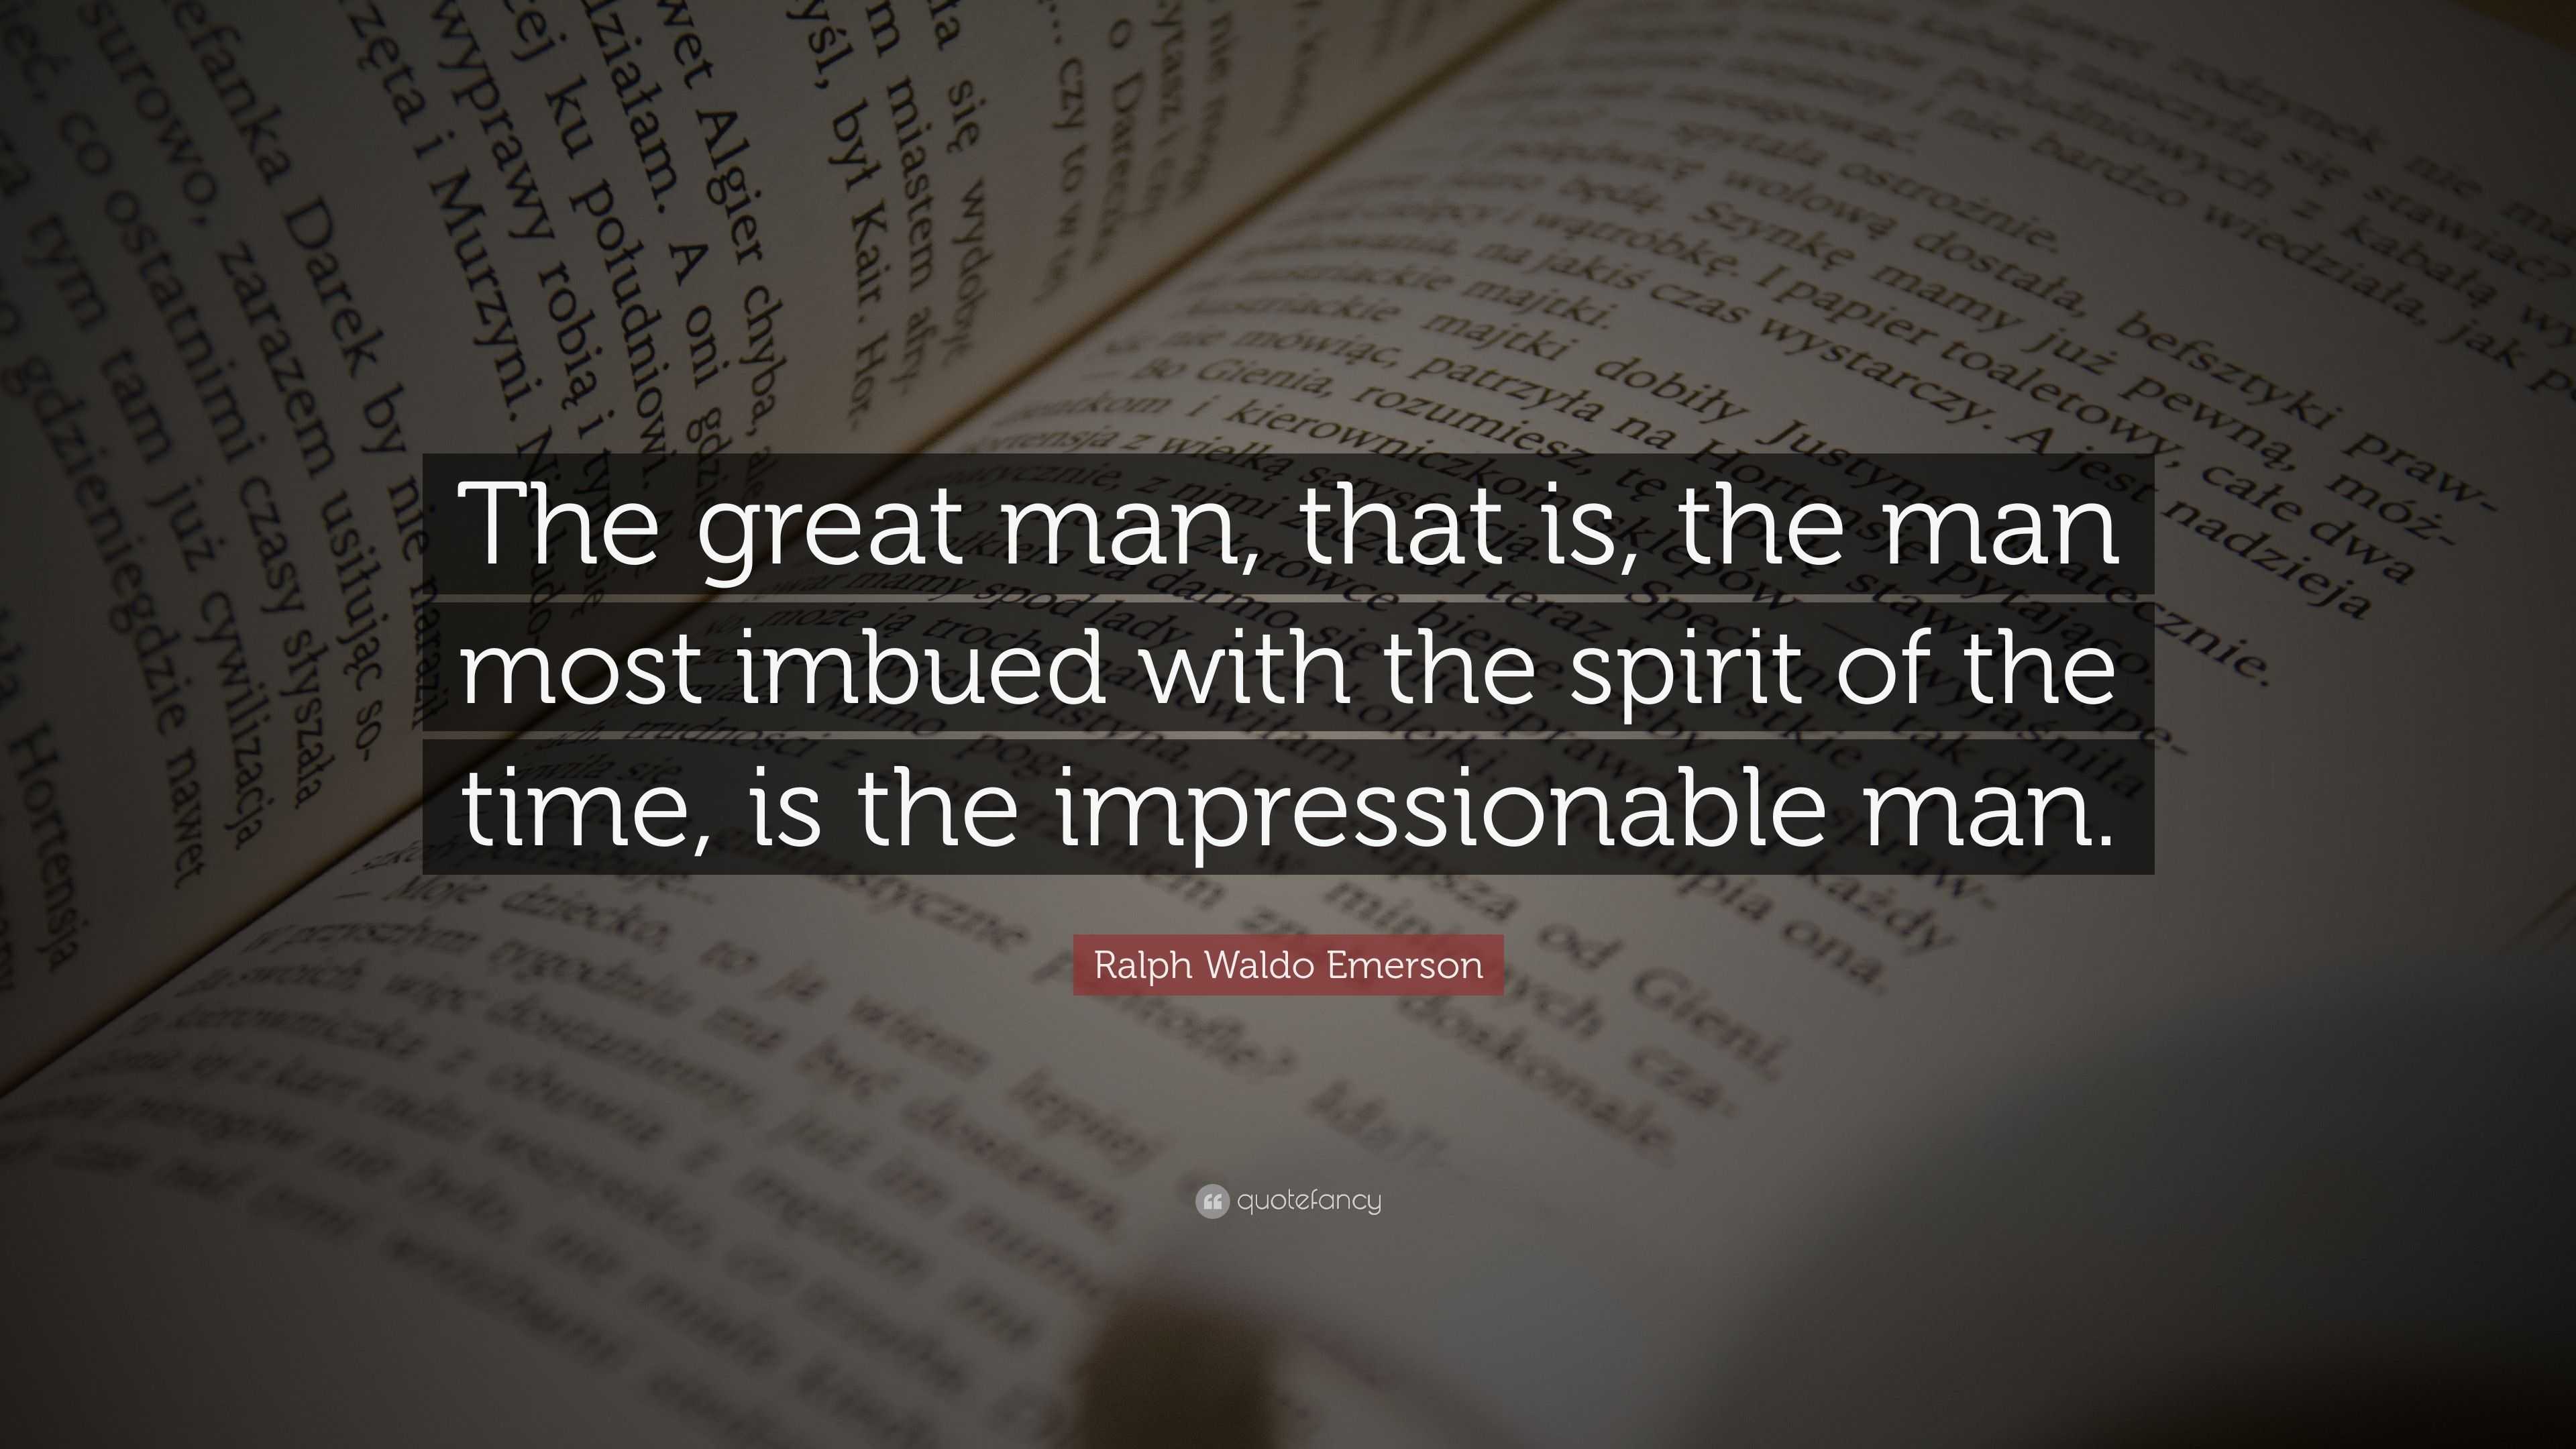 Ralph Waldo Emerson Quote: “The great man, that is, the man most imbued ...